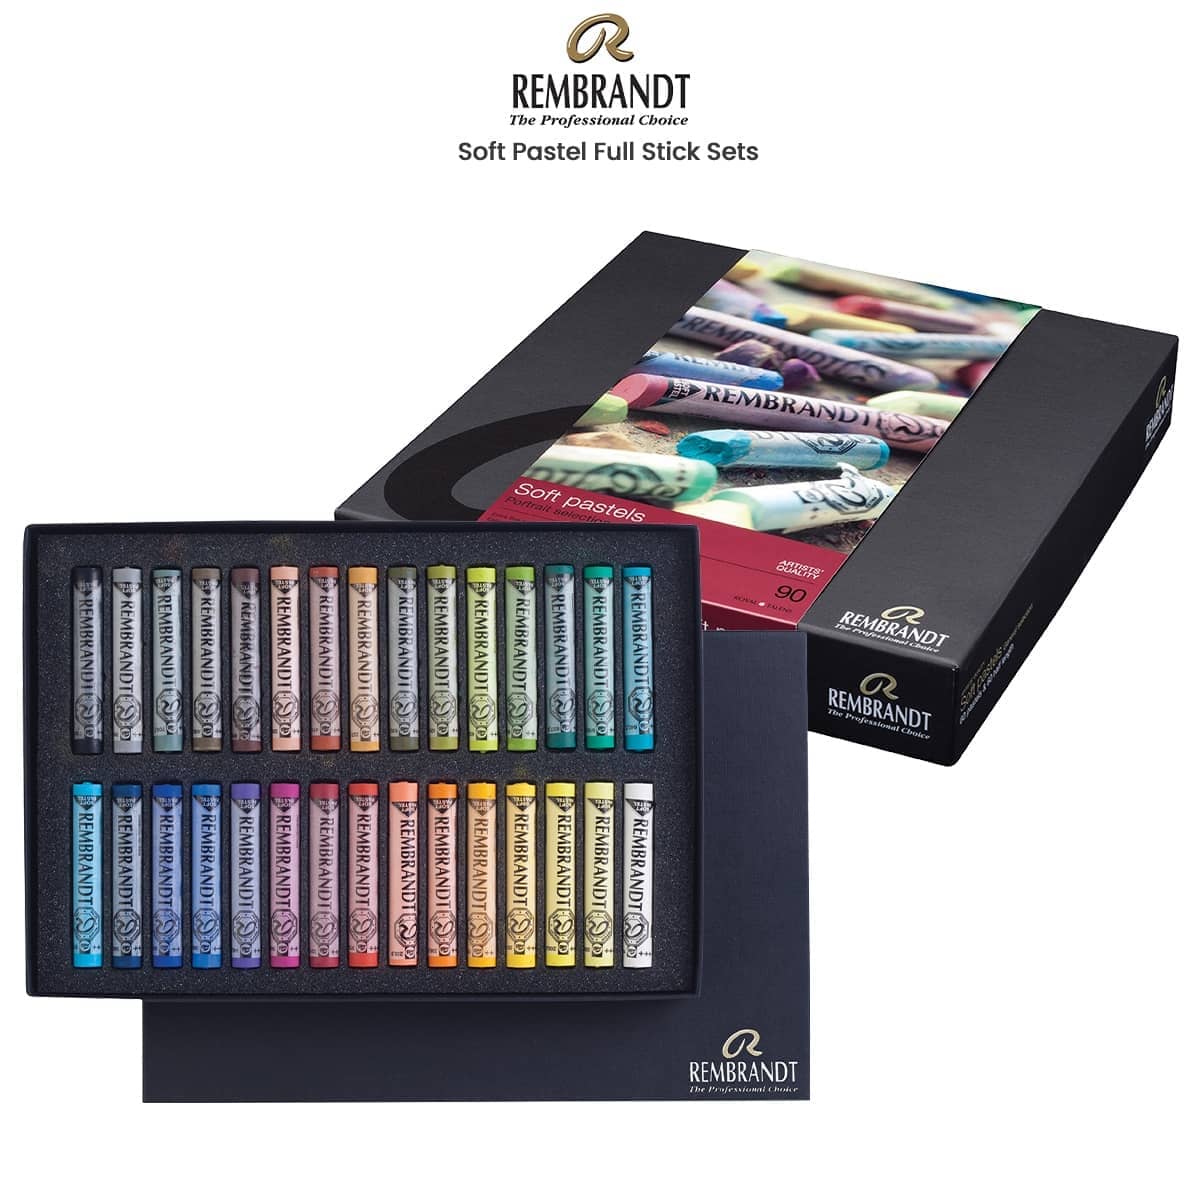 JERRY'S ARTARAMA 80ps Soft Pastel Art Set with Blending Tools, (11x14)  Canvas Panel and Krylon Crystle Clear Spray, Ideal for Artist, Pencil and